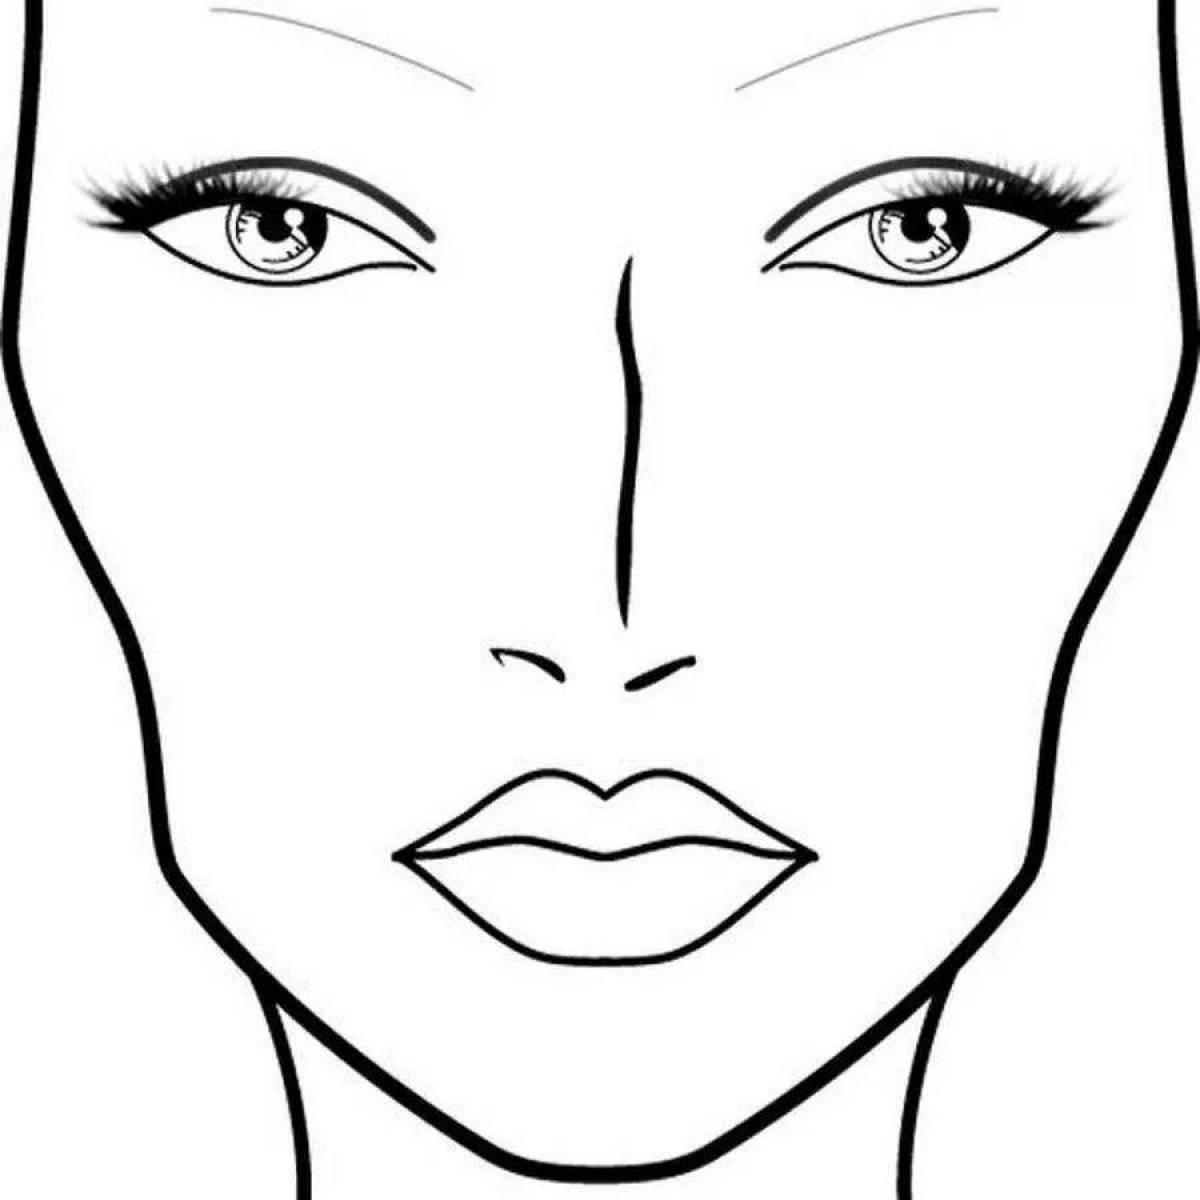 Charming makeup female face coloring page